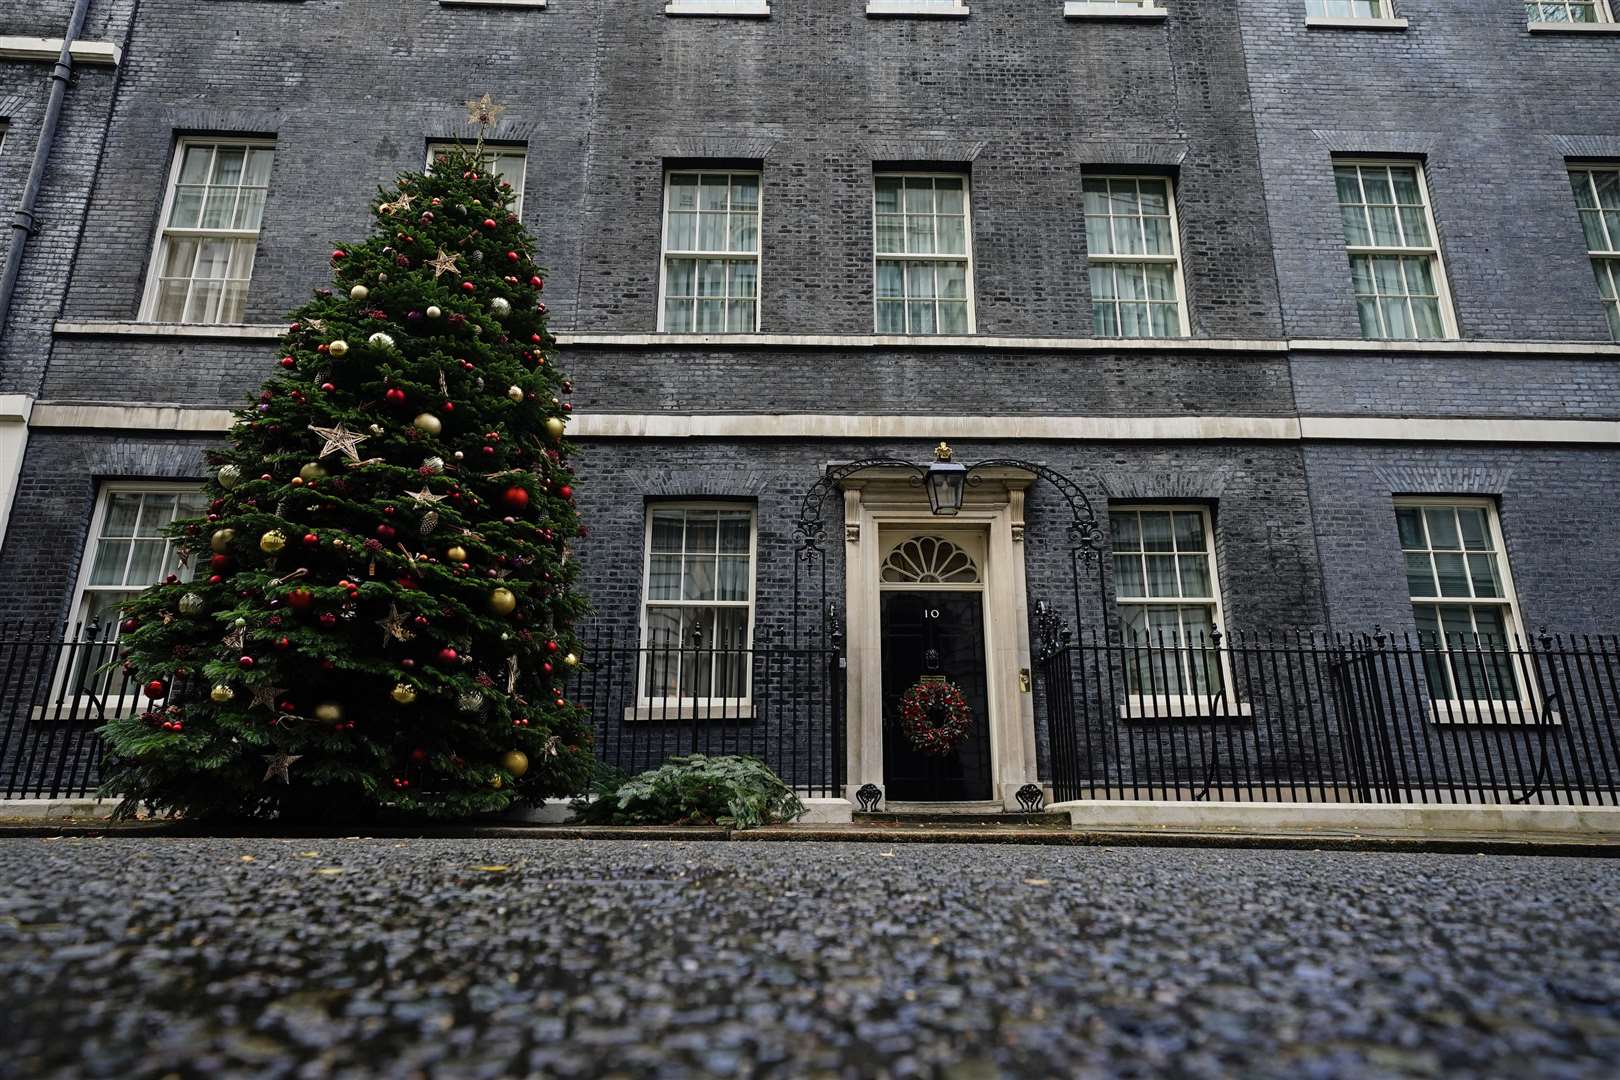 The Christmas tree outside 10 Downing Street (Aaron Chown/PA)